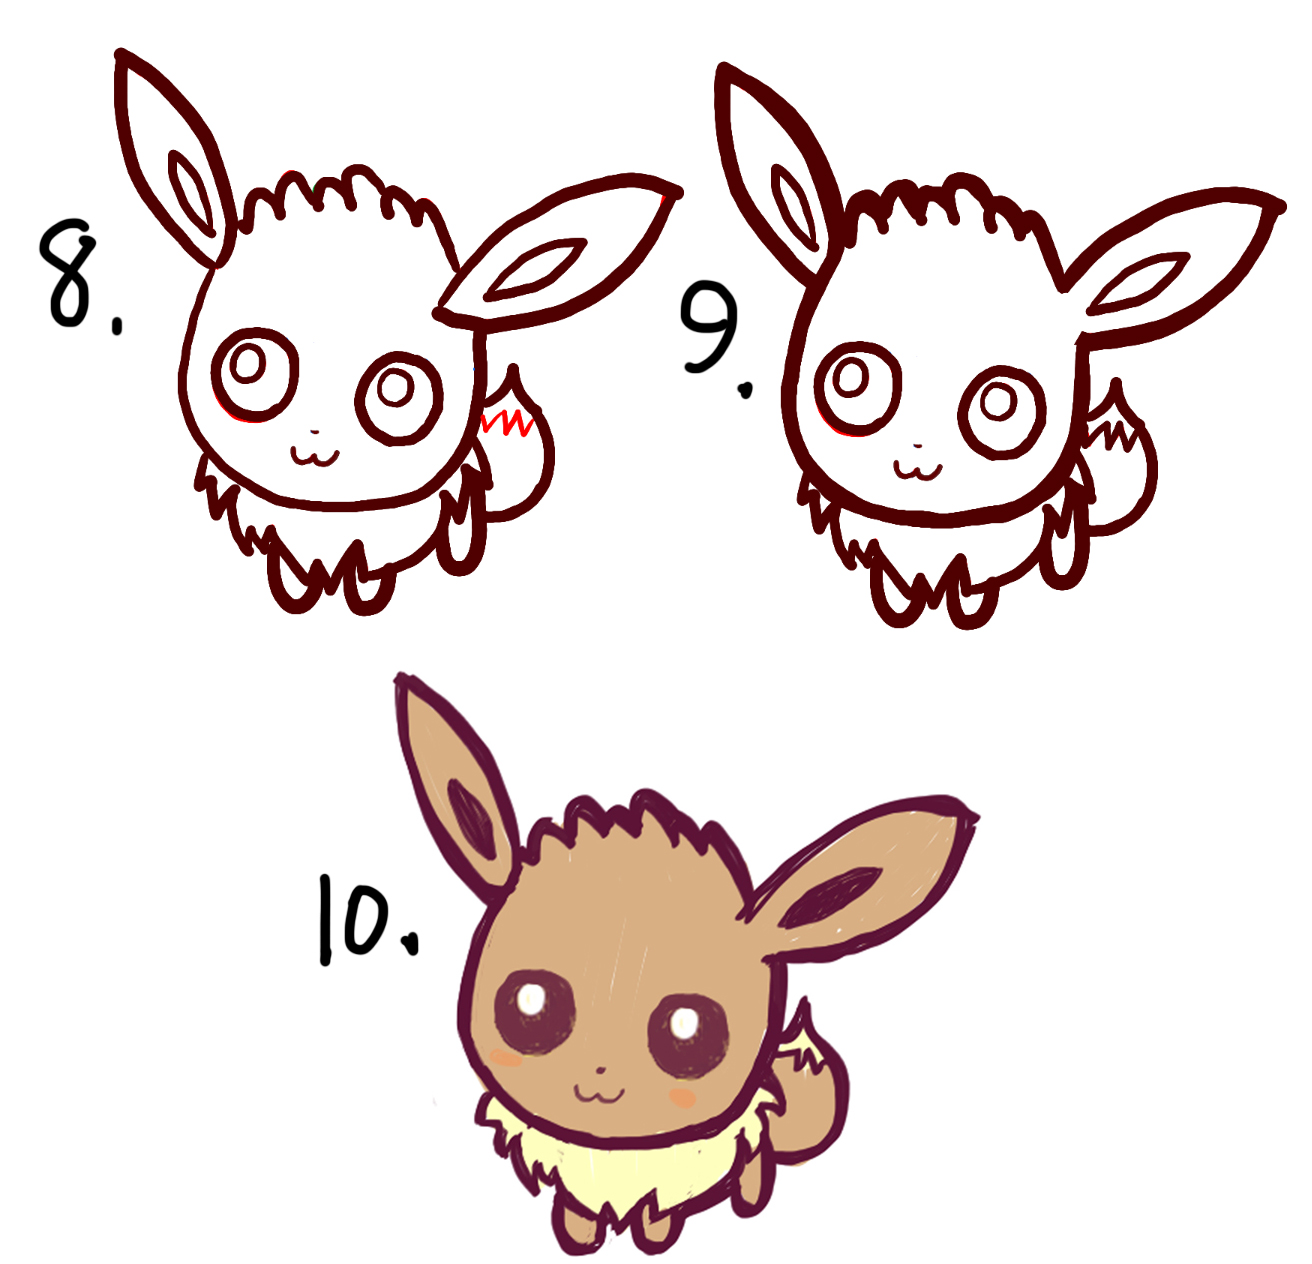 How to Draw Cute Baby Chibi Eevee from Pokemon Easy Step ...